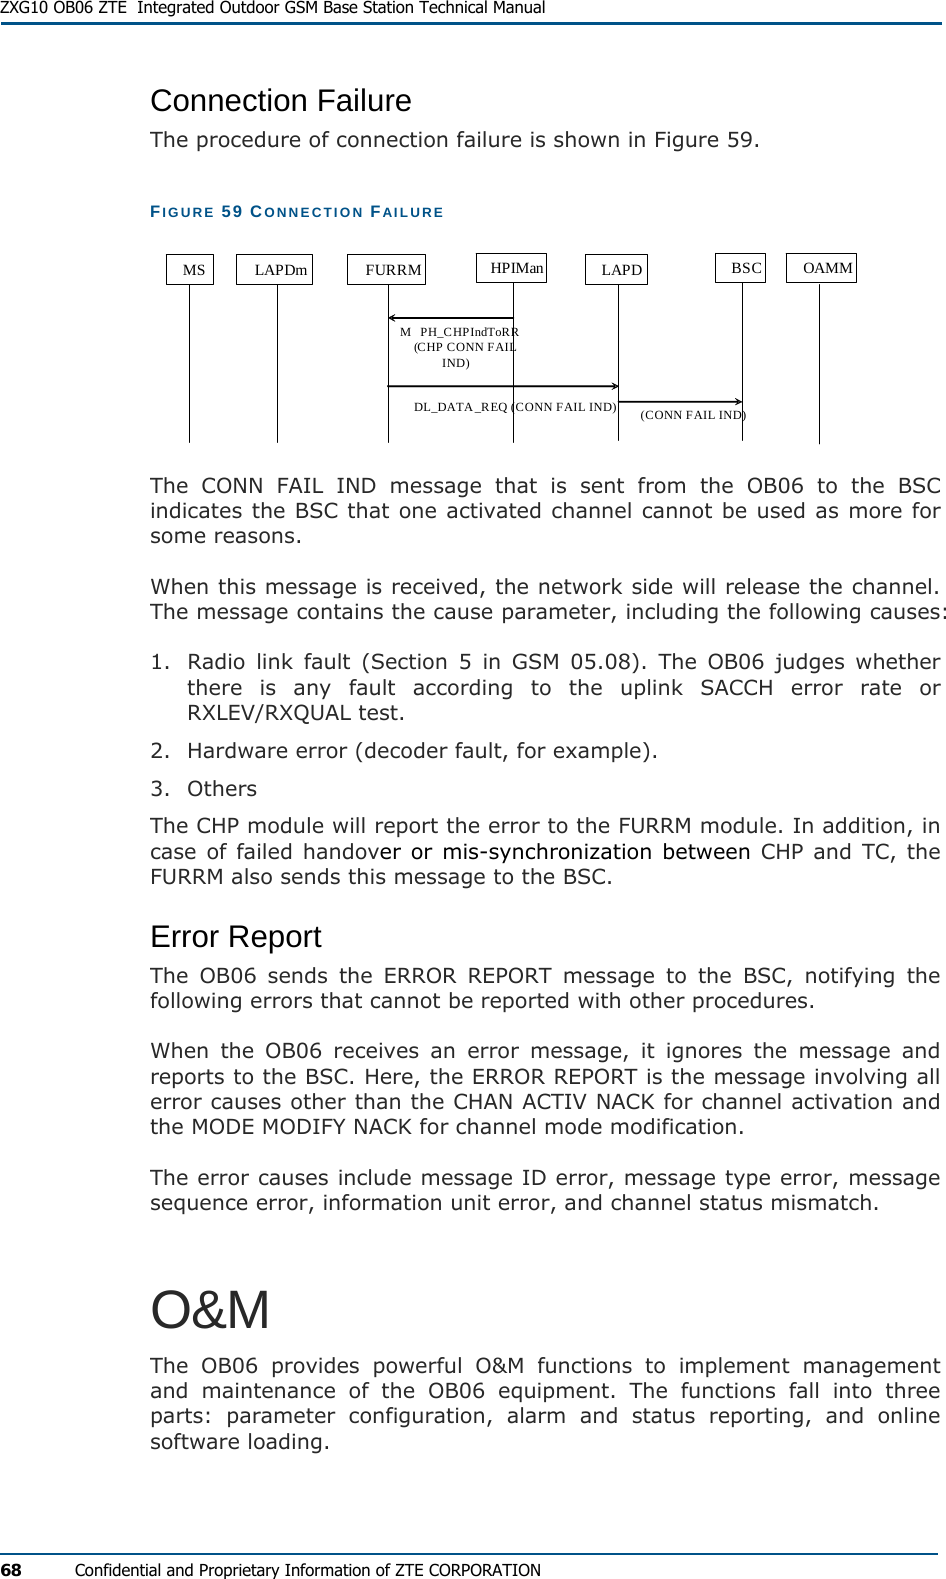  ZXG10 OB06 ZTE  Integrated Outdoor GSM Base Station Technical Manual 68  Confidential and Proprietary Information of ZTE CORPORATION Connection Failure The procedure of connection failure is shown in Figure 59. FIGURE 59 CONNECTION FAILURE MS LAPDm FURRM HPIMan LAPD BSC OAMMM PH_CHPIndToRR (CHP CONN FAIL IND)(CONN FAIL IND) DL_DATA_REQ (CONN FAIL IND) The CONN FAIL IND message that is sent from the OB06 to the BSC indicates the BSC that one activated channel cannot be used as more for some reasons. When this message is received, the network side will release the channel. The message contains the cause parameter, including the following causes: 1.  Radio link fault (Section 5 in GSM 05.08). The OB06 judges whether there is any fault according to the uplink SACCH error rate or RXLEV/RXQUAL test. 2.  Hardware error (decoder fault, for example). 3. Others The CHP module will report the error to the FURRM module. In addition, in case of failed handover or mis-synchronization between CHP and TC, the FURRM also sends this message to the BSC. Error Report The OB06 sends the ERROR REPORT message to the BSC, notifying the following errors that cannot be reported with other procedures. When the OB06 receives an error message, it ignores the message and reports to the BSC. Here, the ERROR REPORT is the message involving all error causes other than the CHAN ACTIV NACK for channel activation and the MODE MODIFY NACK for channel mode modification. The error causes include message ID error, message type error, message sequence error, information unit error, and channel status mismatch. O&amp;M The OB06 provides powerful O&amp;M functions to implement management and maintenance of the OB06 equipment. The functions fall into three parts: parameter configuration, alarm and status reporting, and online software loading. 